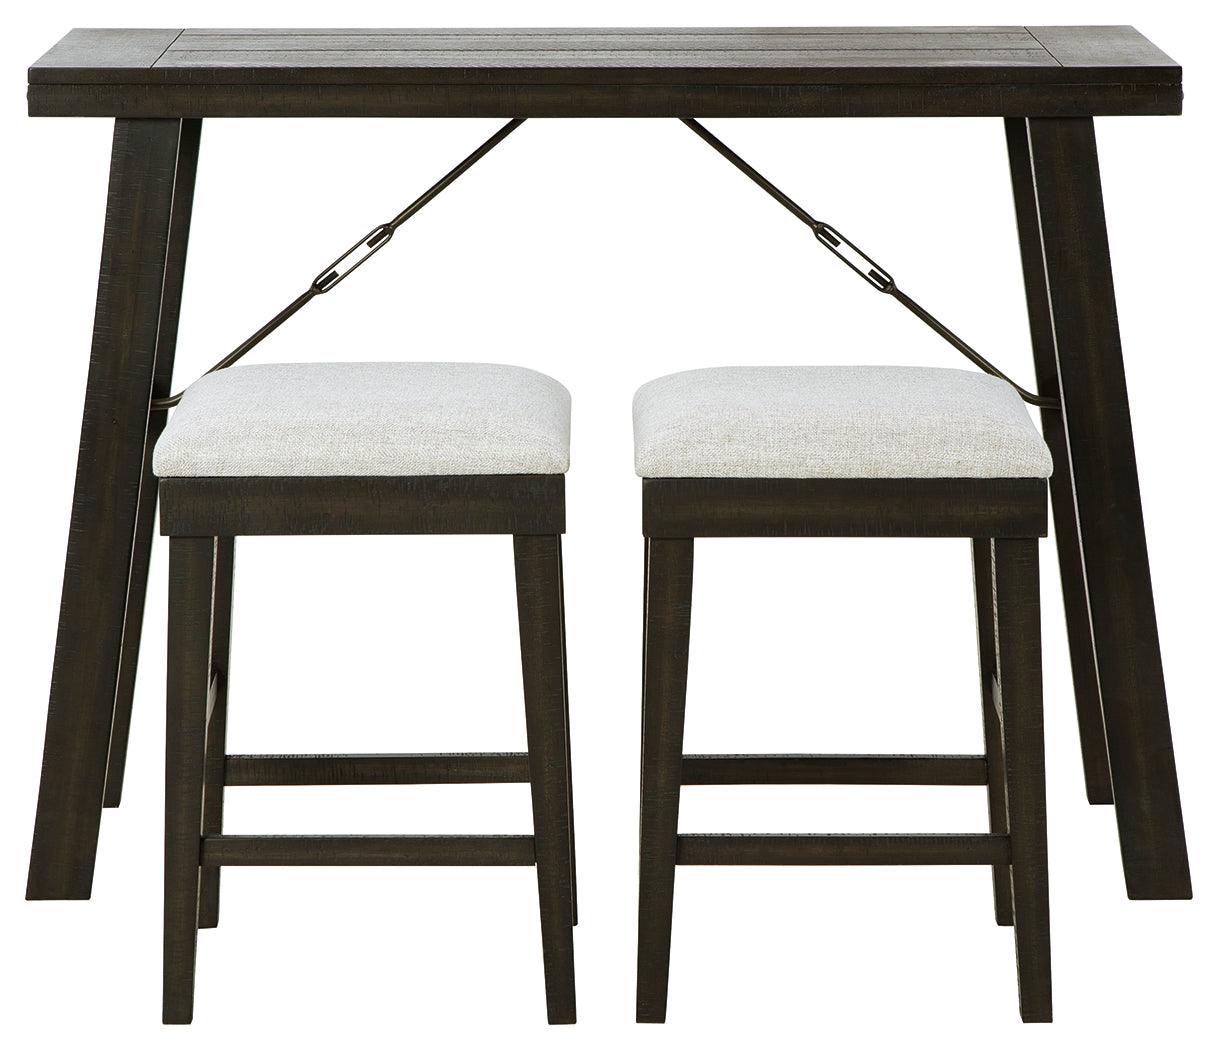 Noorbrook Antique Black Counter Height Dining Table And Bar Stools (Set Of 3) - Ella Furniture